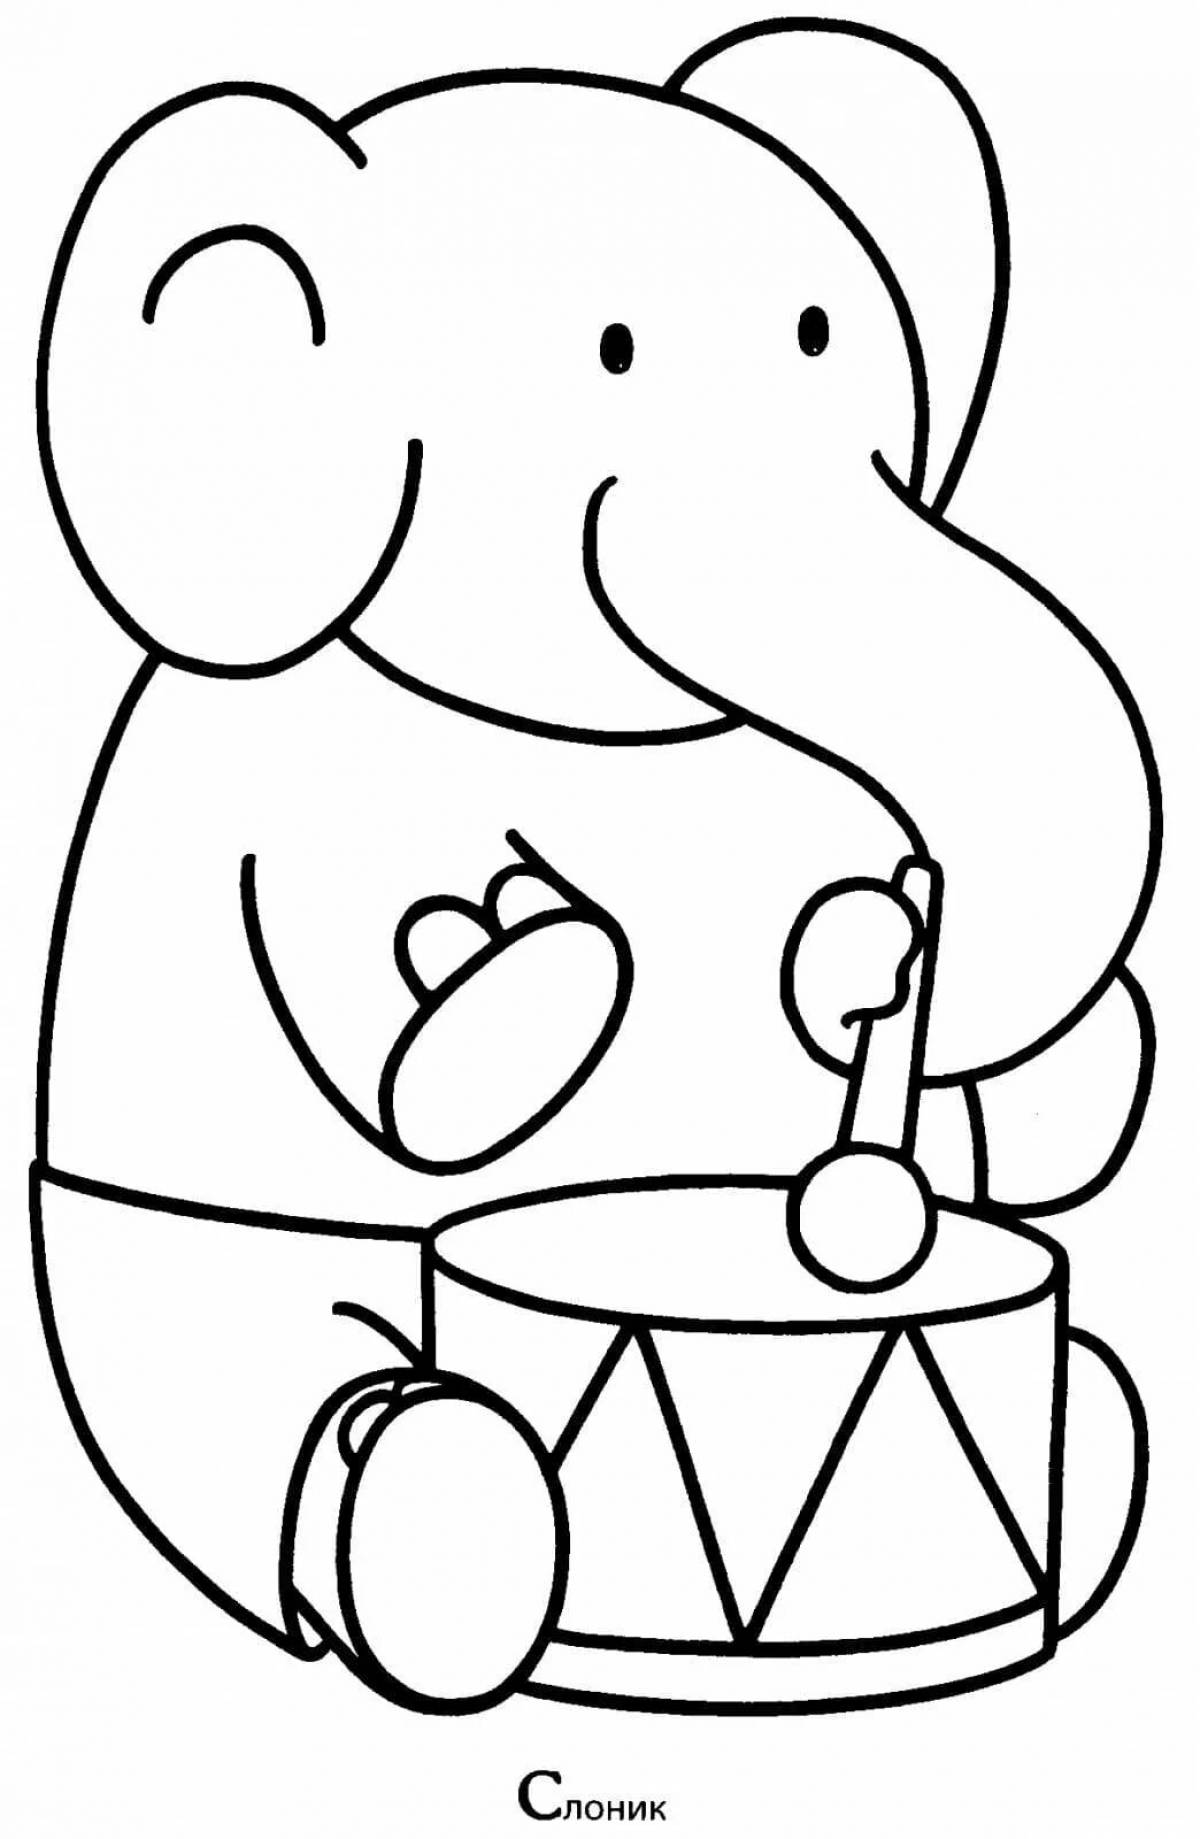 Colorful coloring pages for children page 2